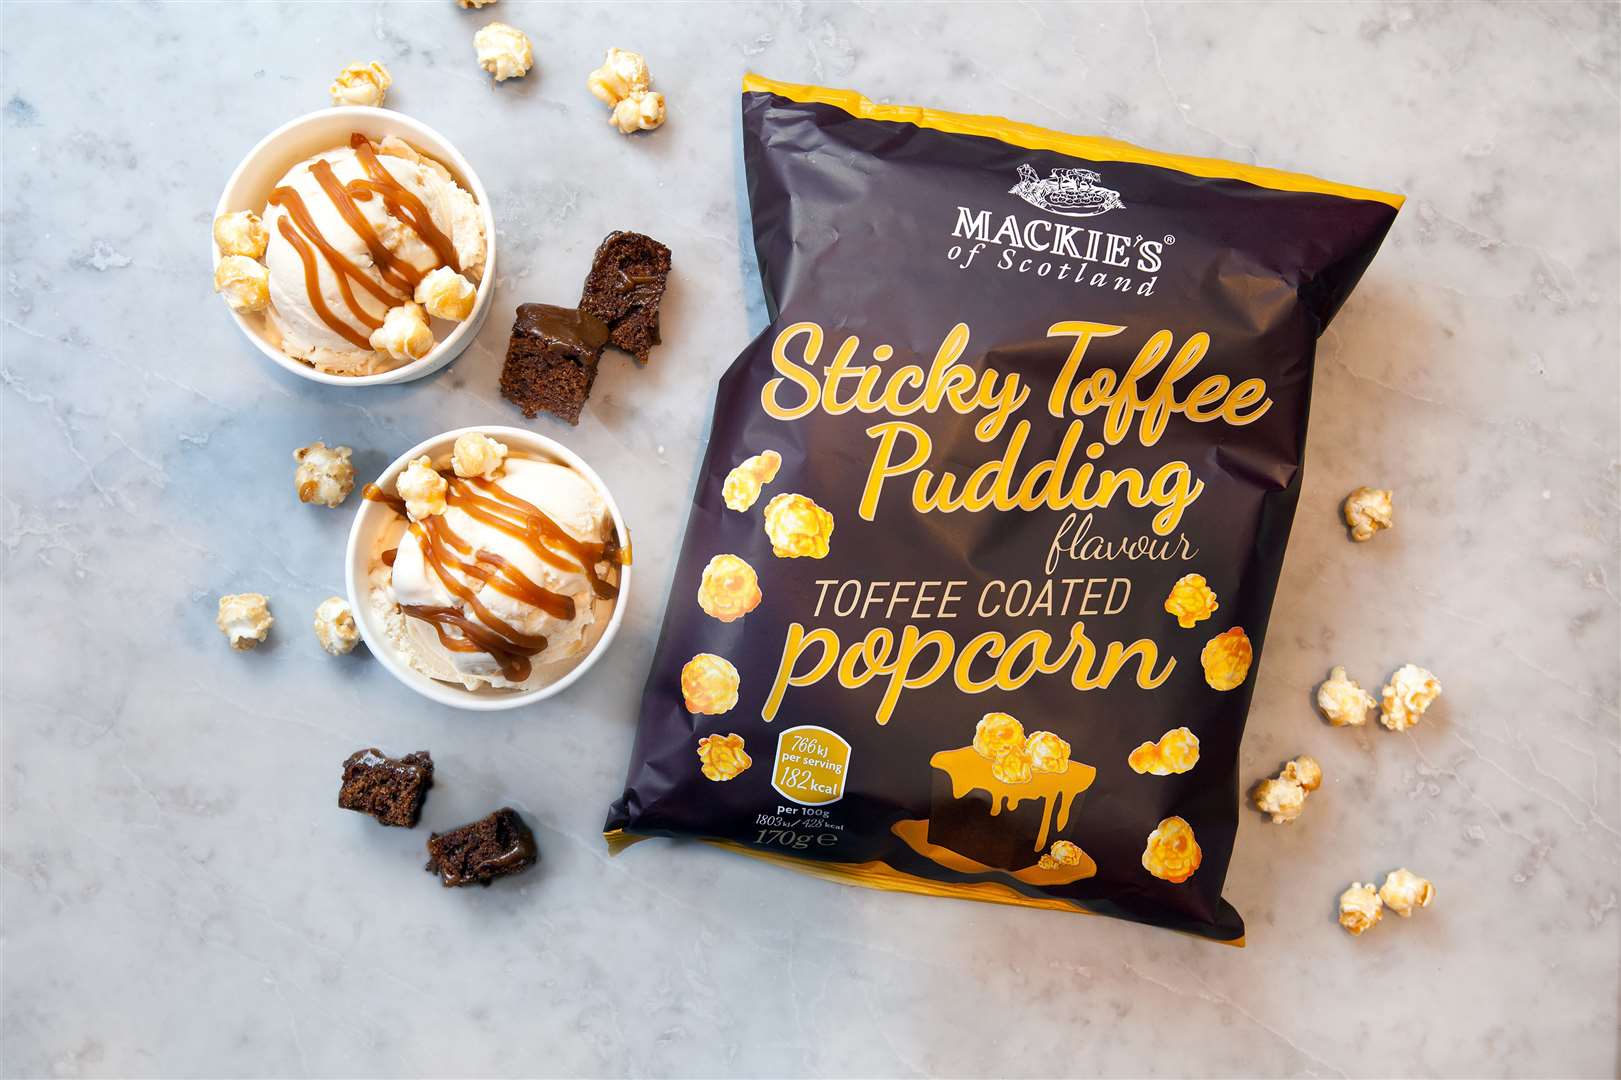 Sticky toffee pudding popcorn is the latest permanent product from Mackie's.